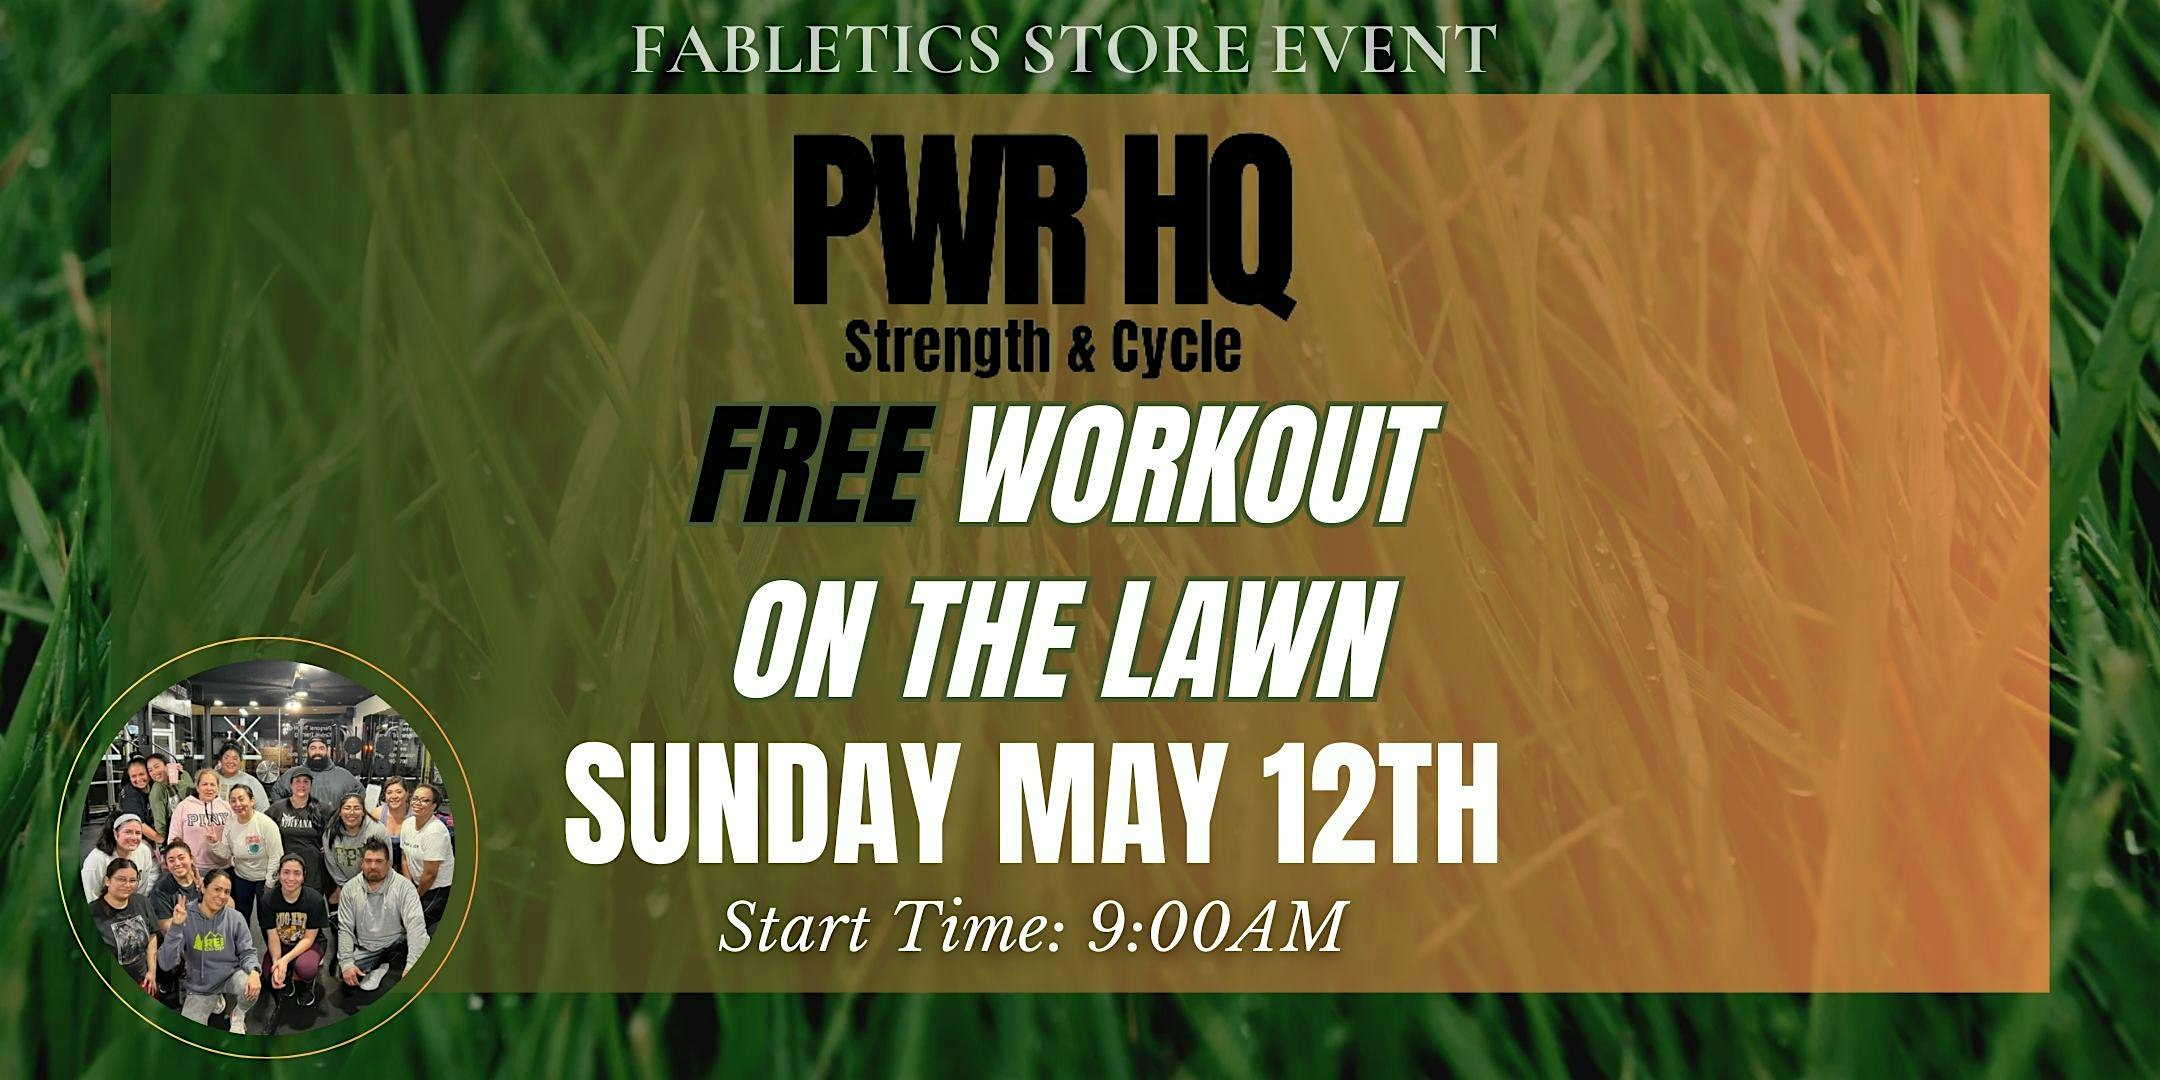 FREE strength training lawn workout